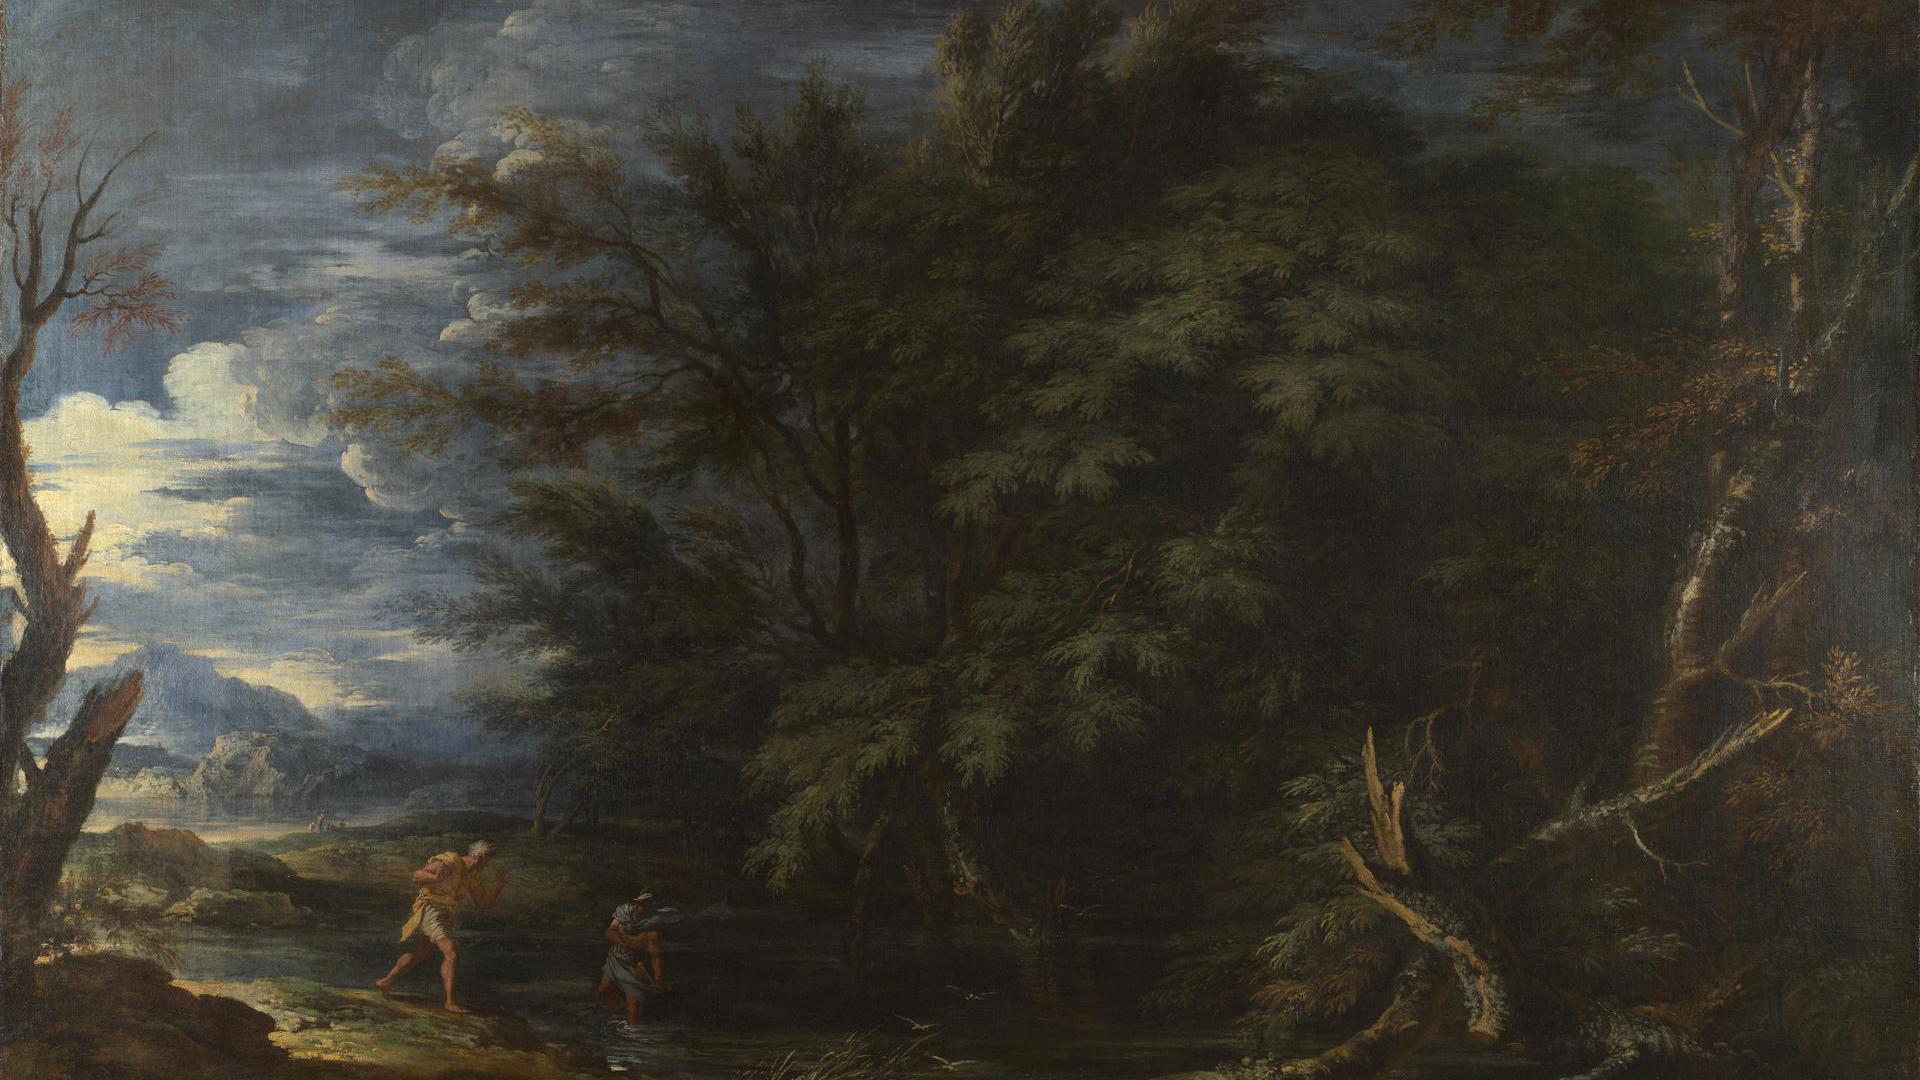 Landscape with Mercury and the Dishonest Woodman by Salvator Rosa